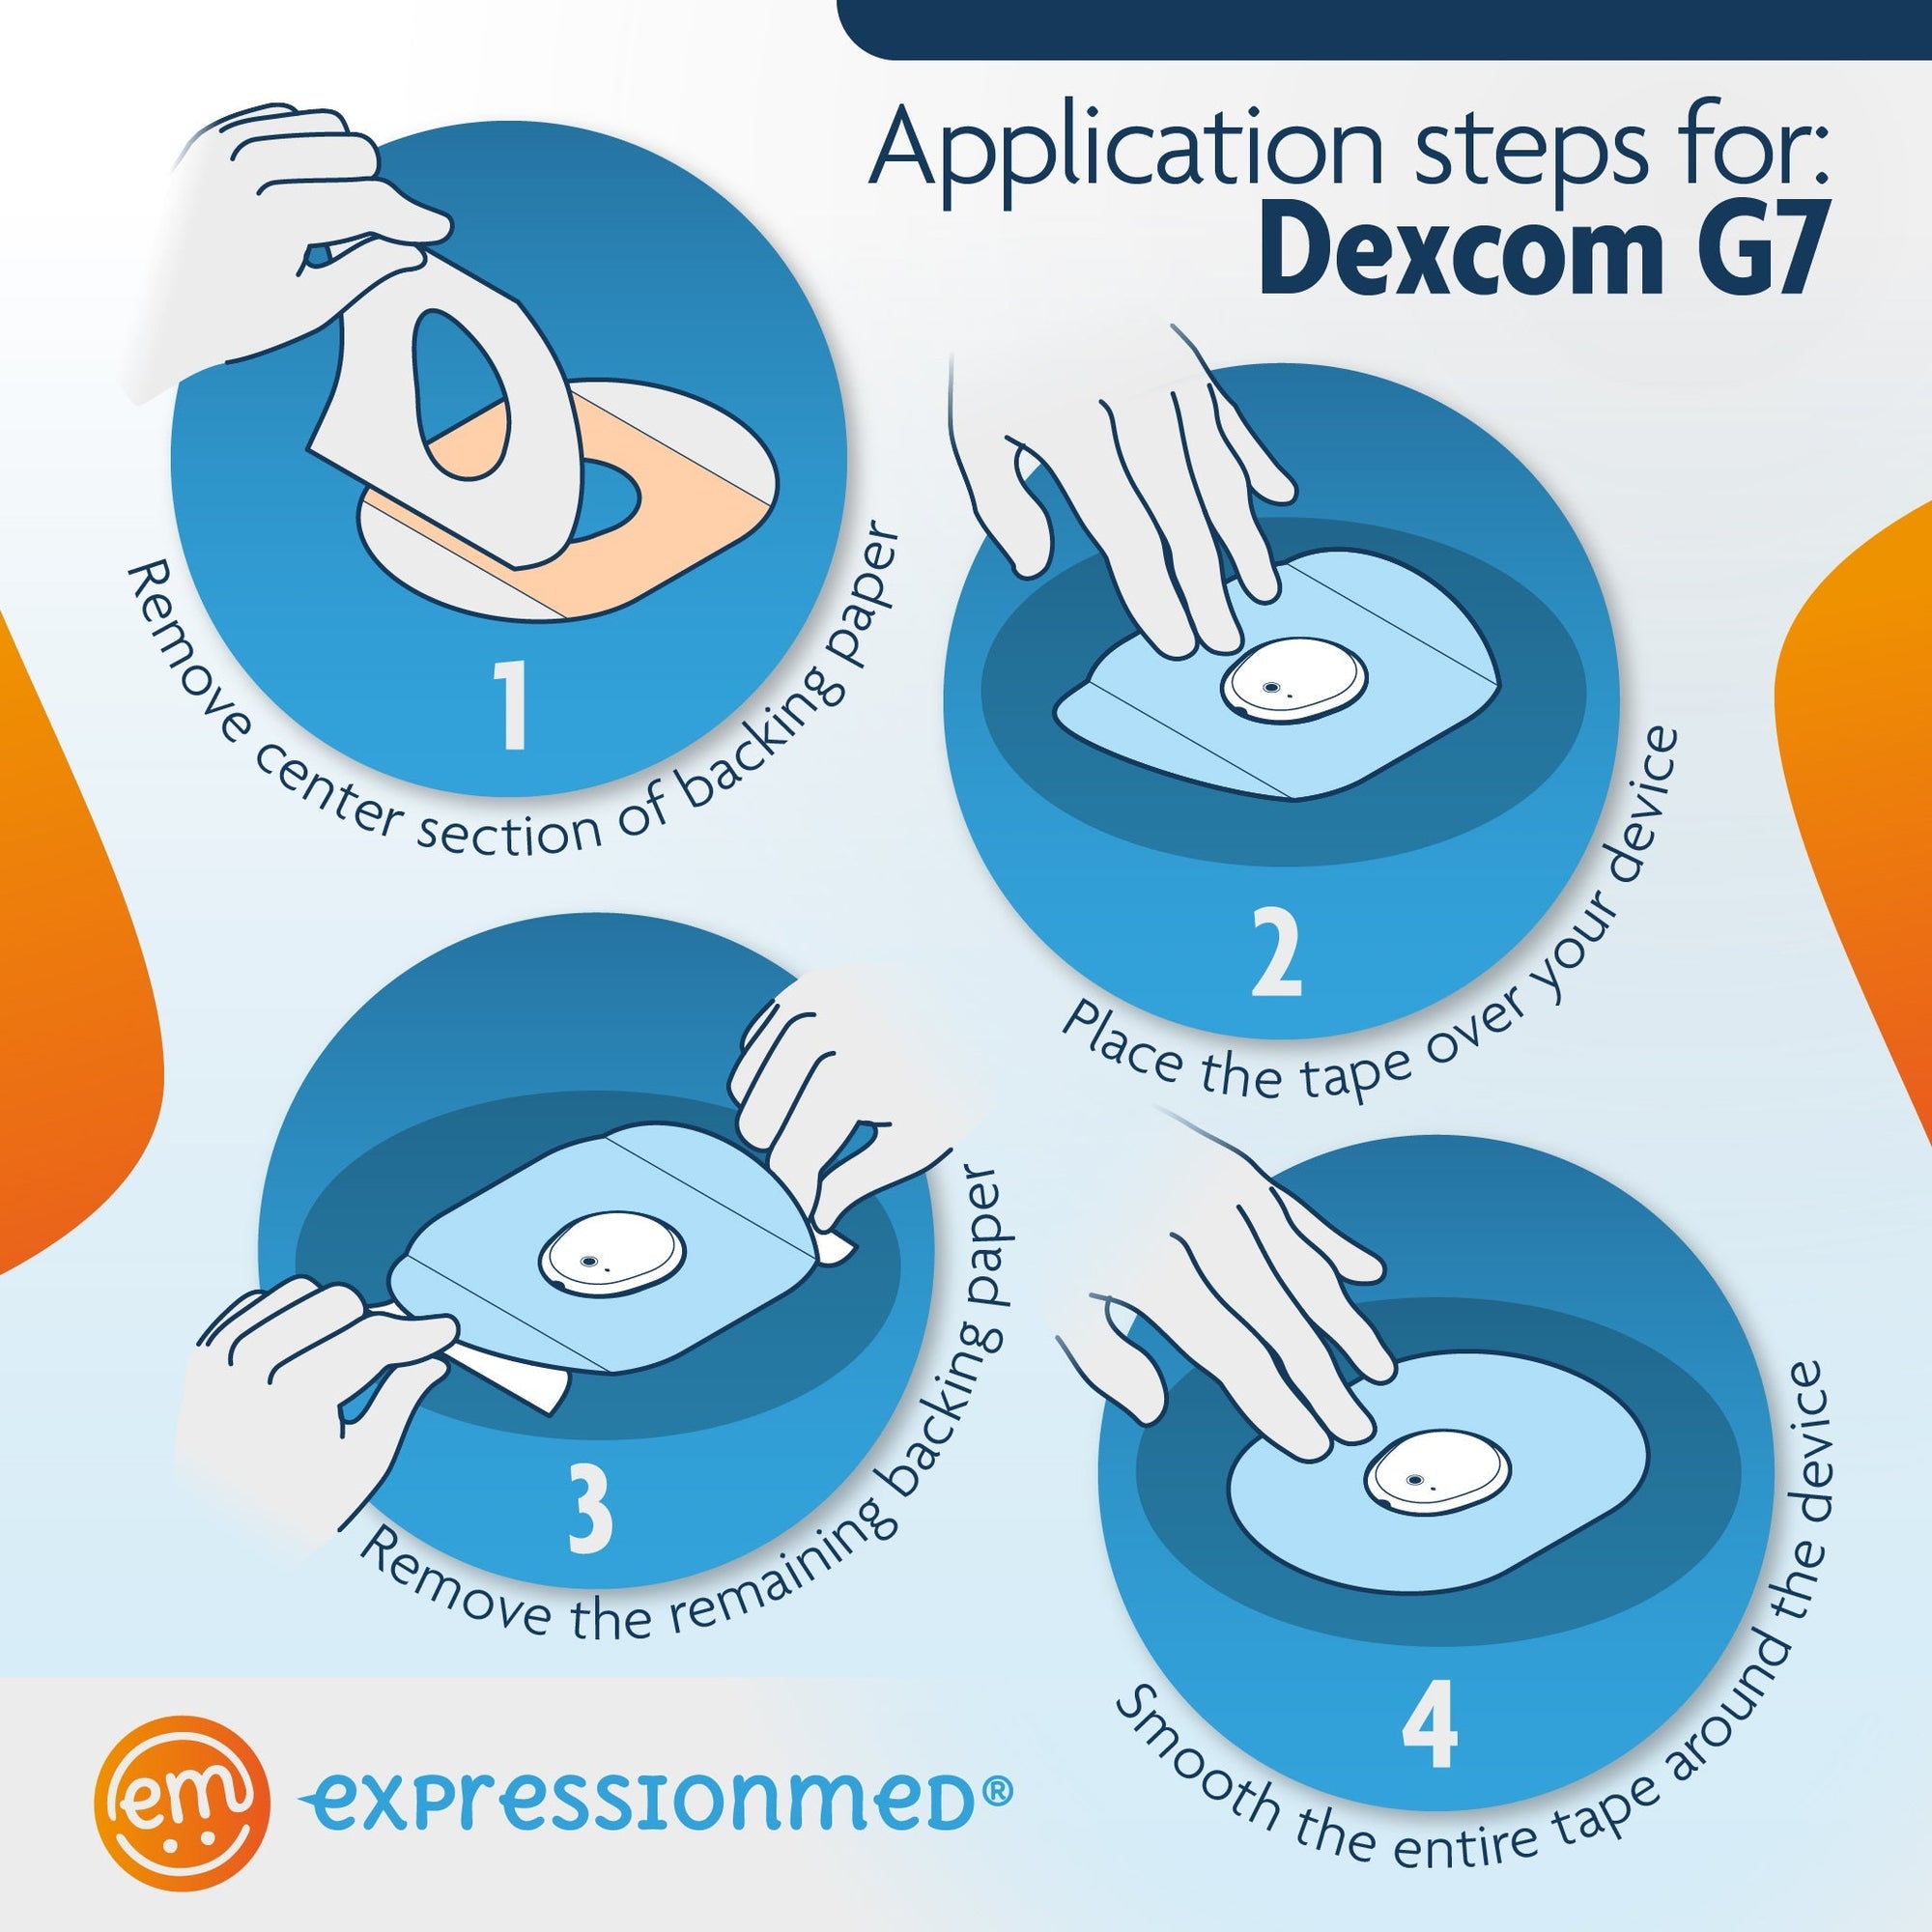 ExpressionMed Application InstructionsApplication Instructions. 1. Prep skin with soap and water. 2. Remove Middle Section and lay center hole over device. 3. Peel off both end sections and smooth down on skin. To remove, hold an edge and strech material off skin., Dexcom Stelo Glucose Biosensor System